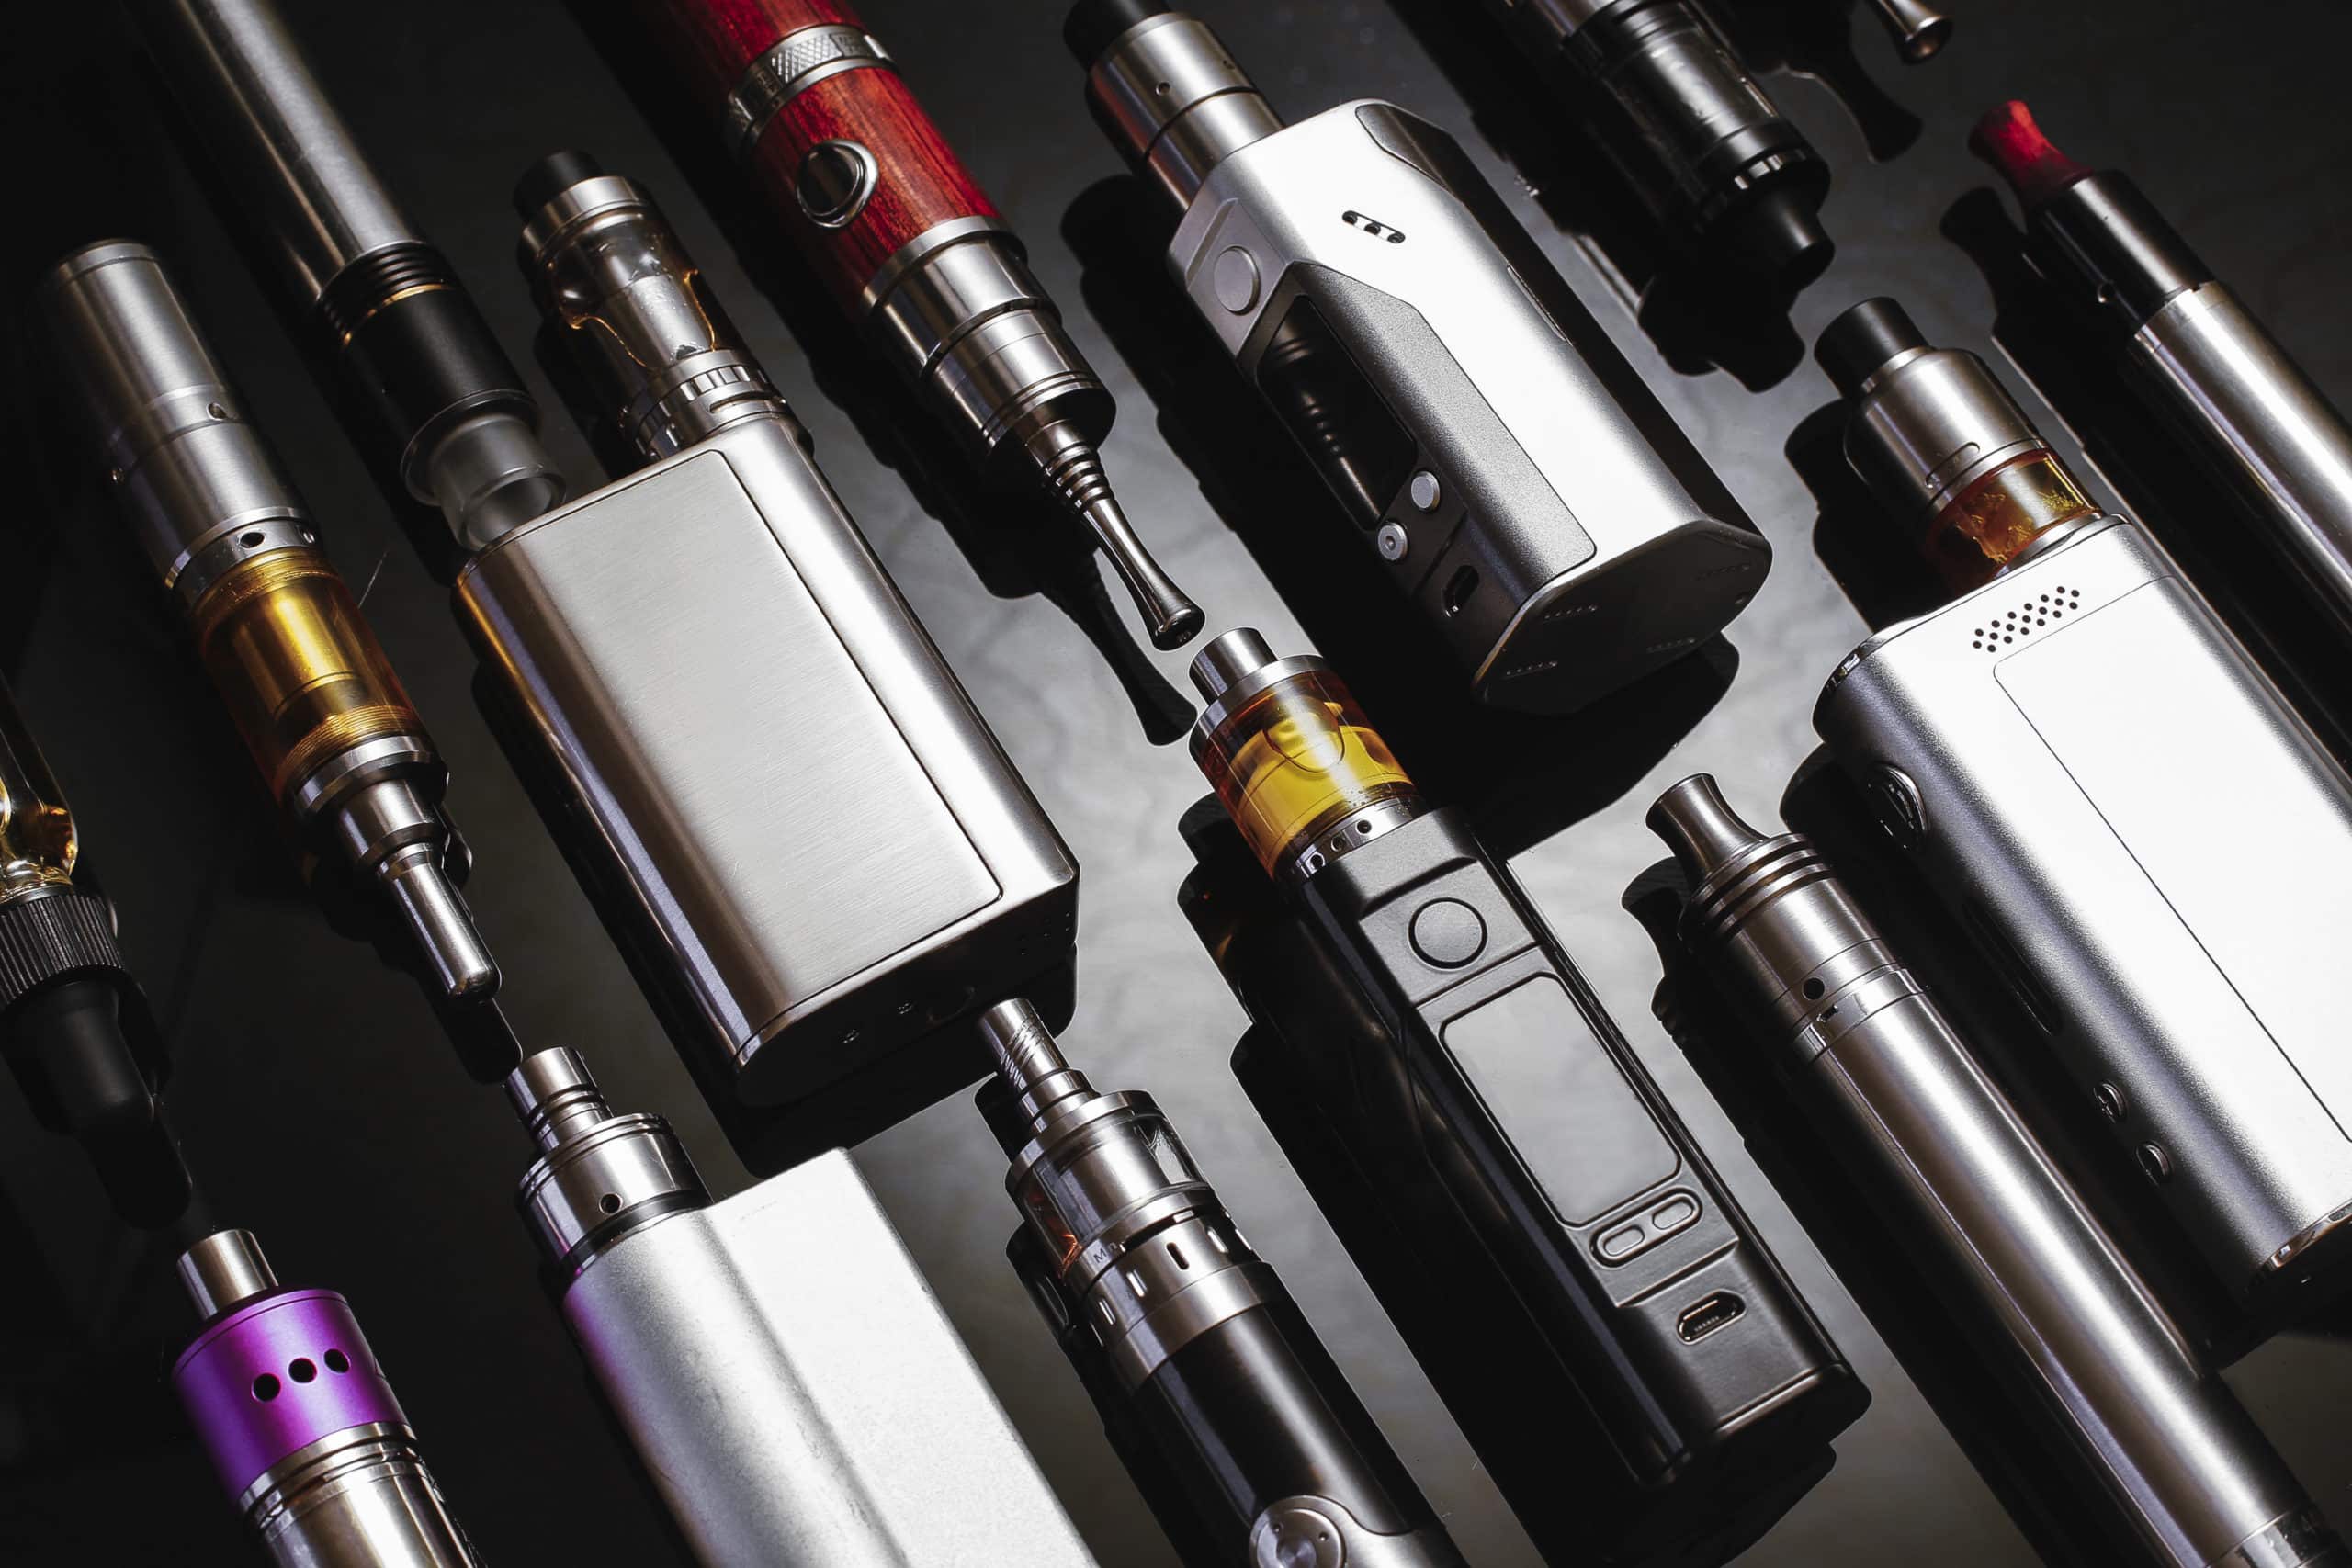 Vector Solutions Launches Vaping Prevention Resources to Address Dangers of Growing Vaping Crisis